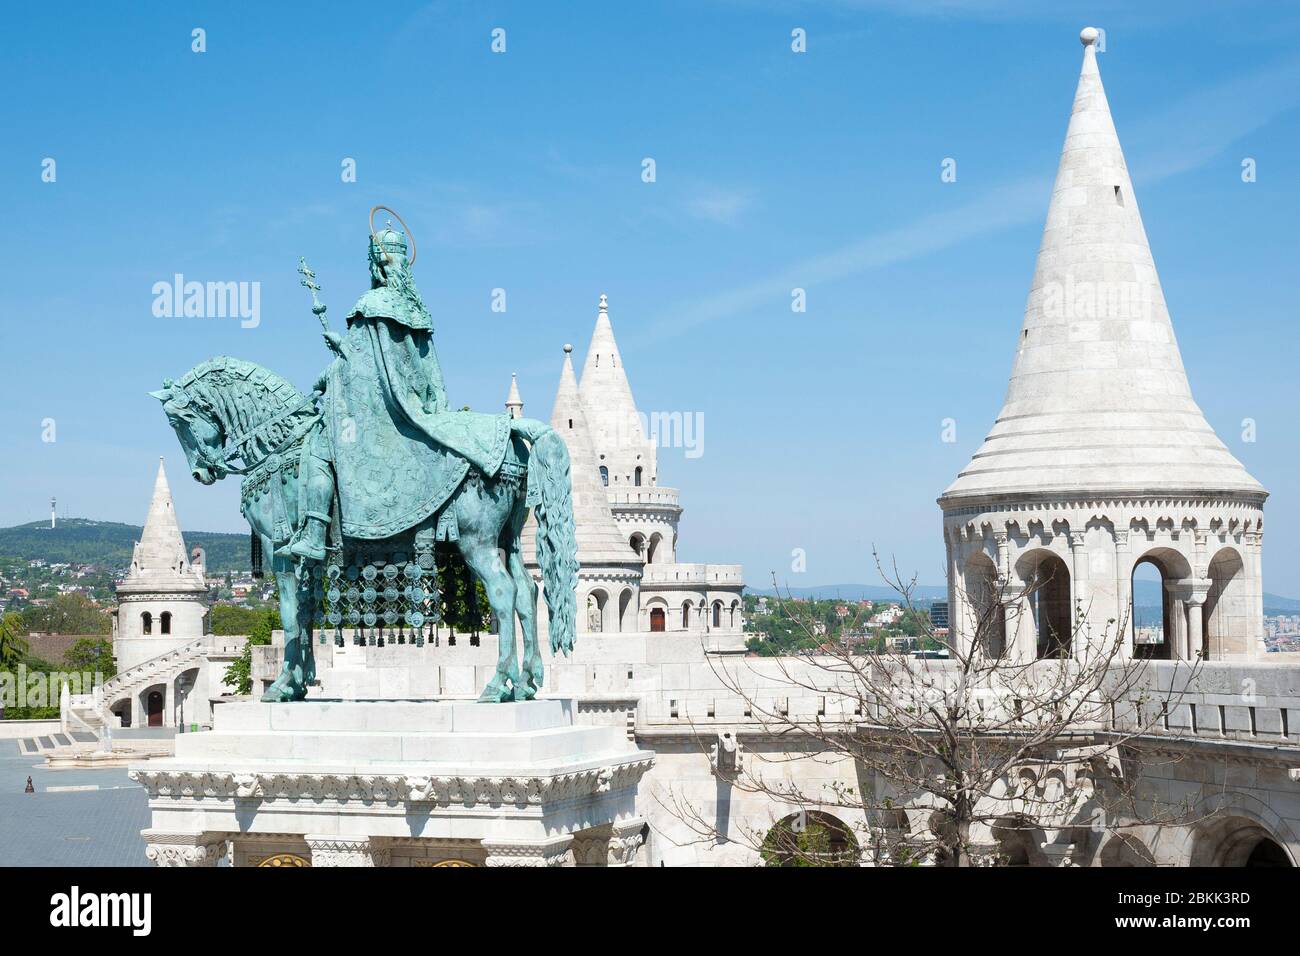 Budapest, Hungary - APRIL 24. 2020: Statue of St. Stephen King at Fisherman's bastion in Budapest Stock Photo